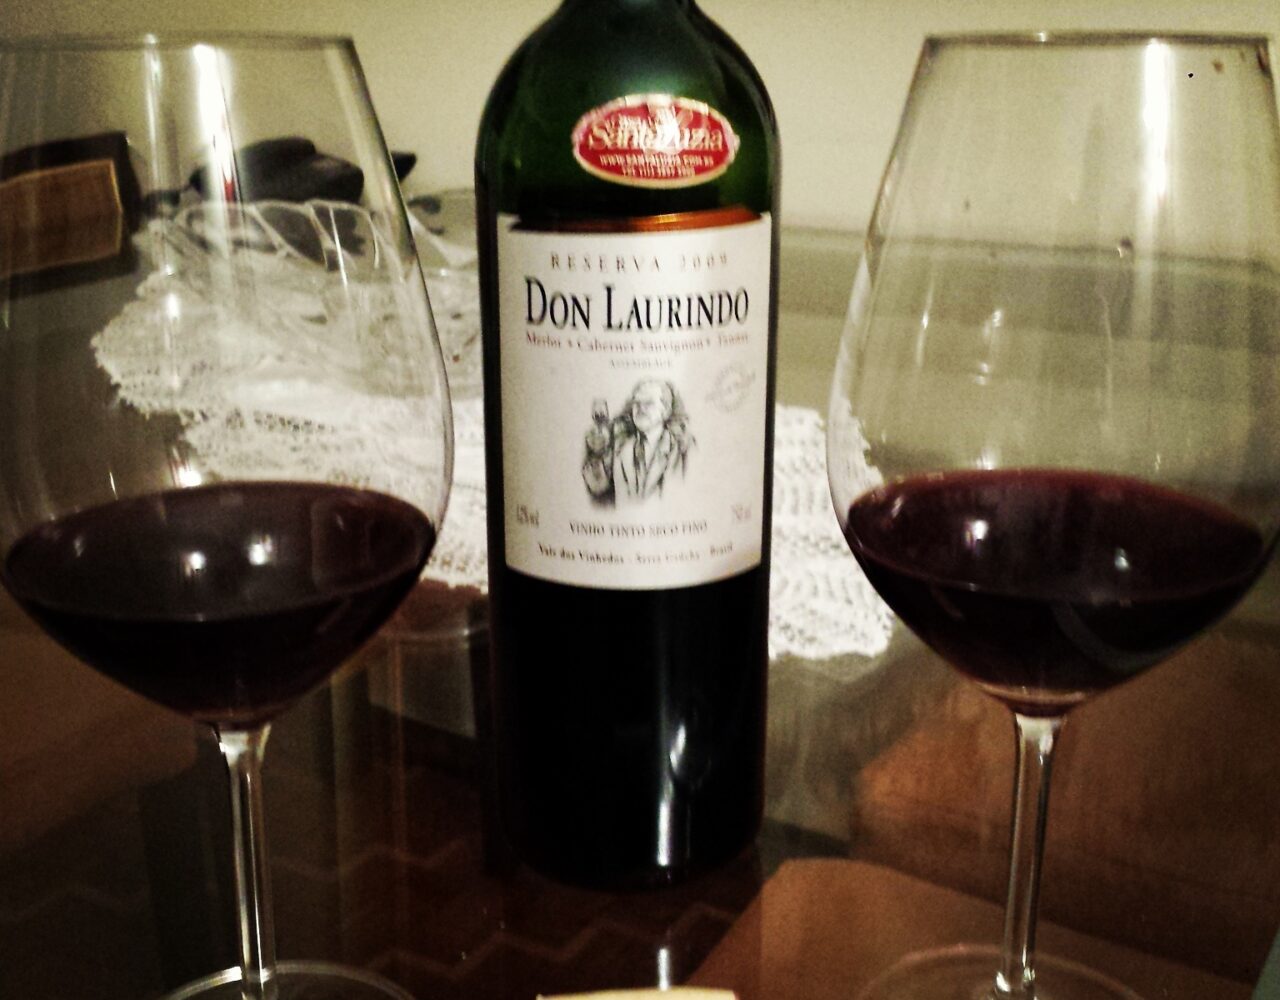 Don Laurindo Assemblage 2009: Review